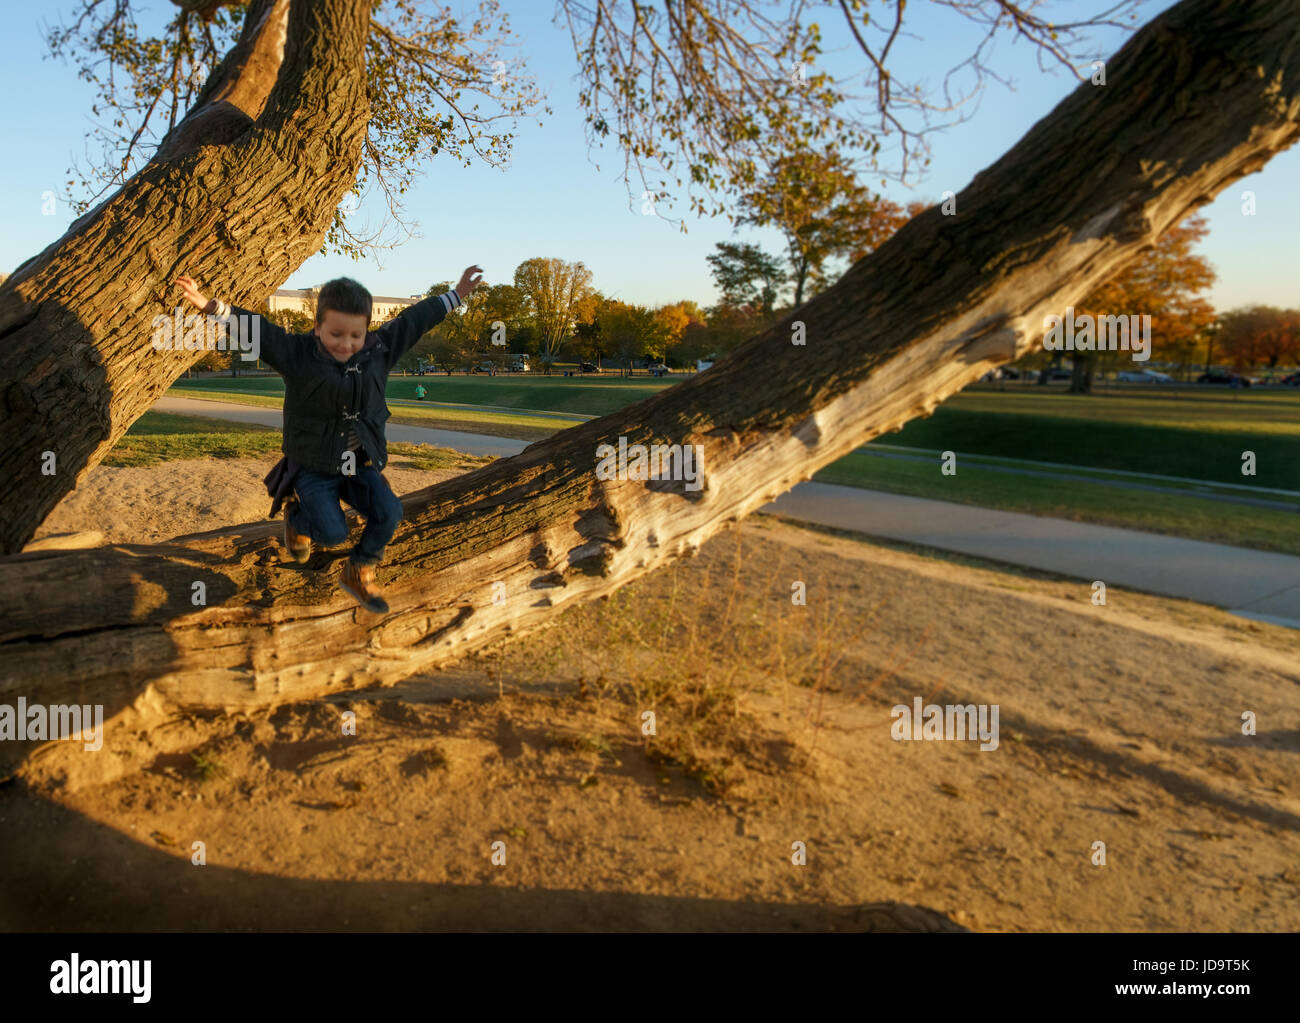 Action shot of carefree young boy jumping off tree branch with arms outstretched. washington capital usa 2016 fall Stock Photo